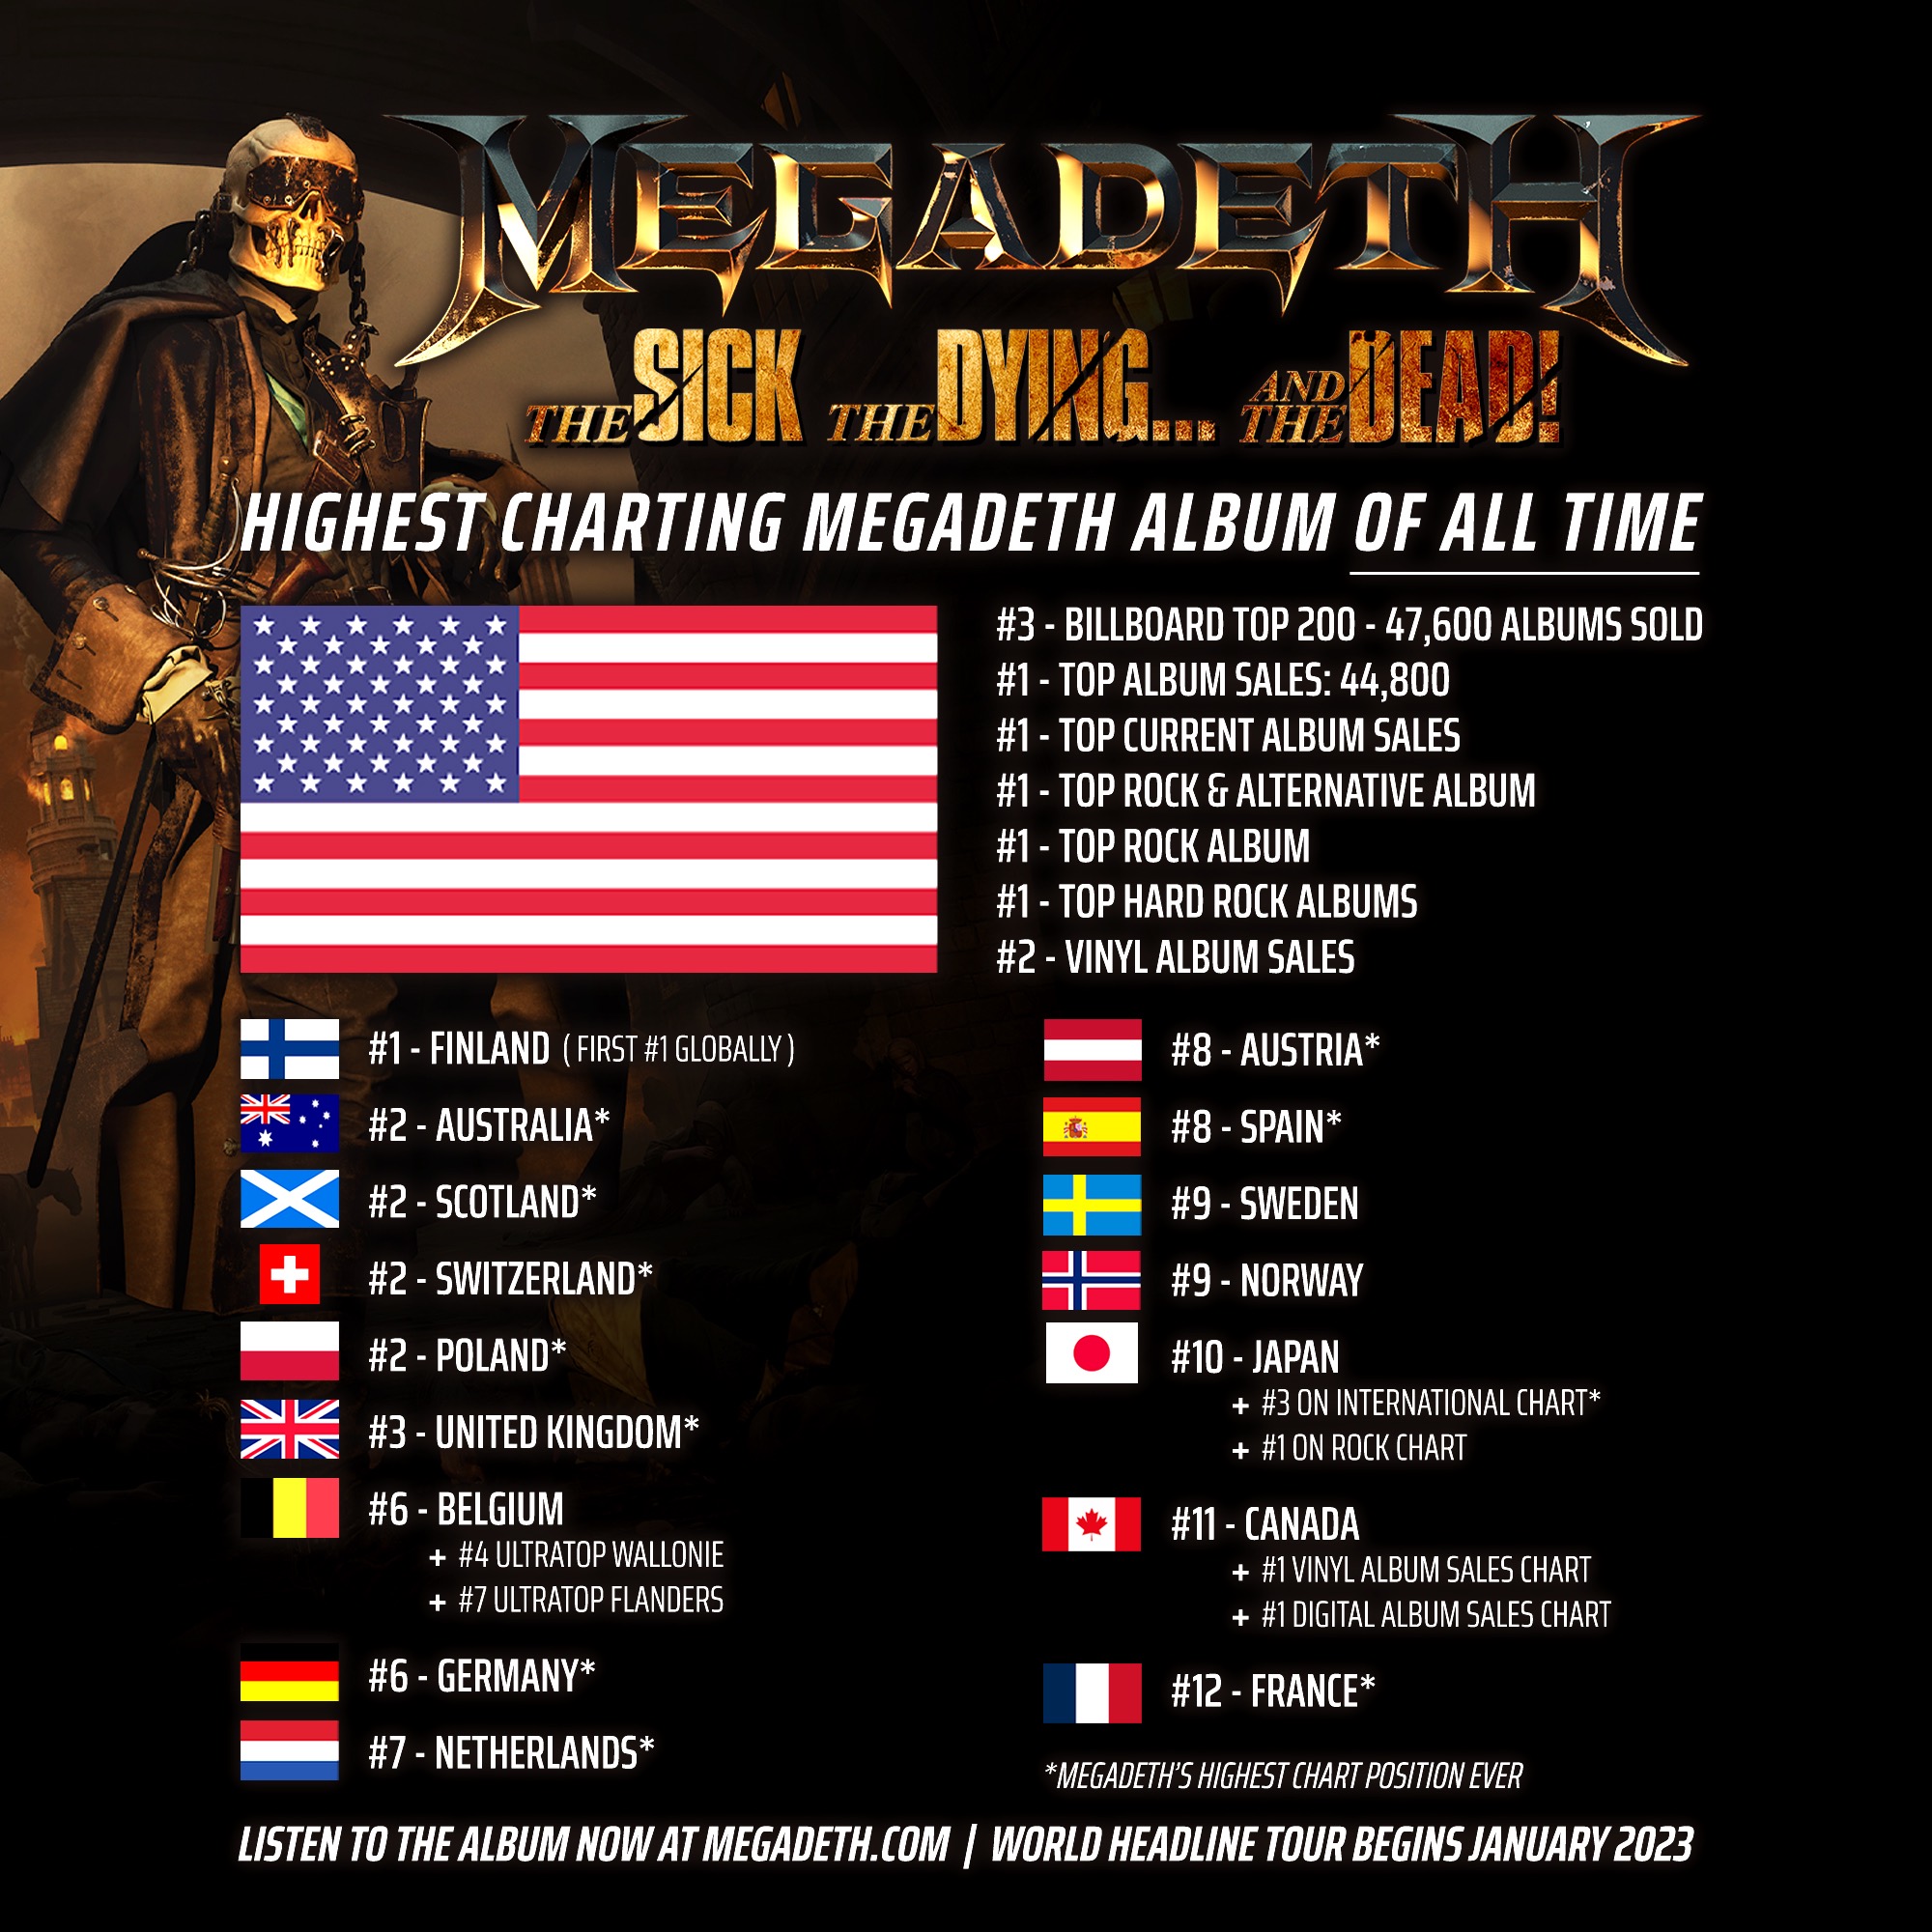 MEGADETH’S NEW ALBUM ‘THE SICK, THE DYING… AND THE DEAD!’ STORMS THE CHARTS AT NUMBER 3 ON THE BILLBOARD 200, HIGHEST CHARTING MEGADETH ALBUM EVER AROUND THE WORLD